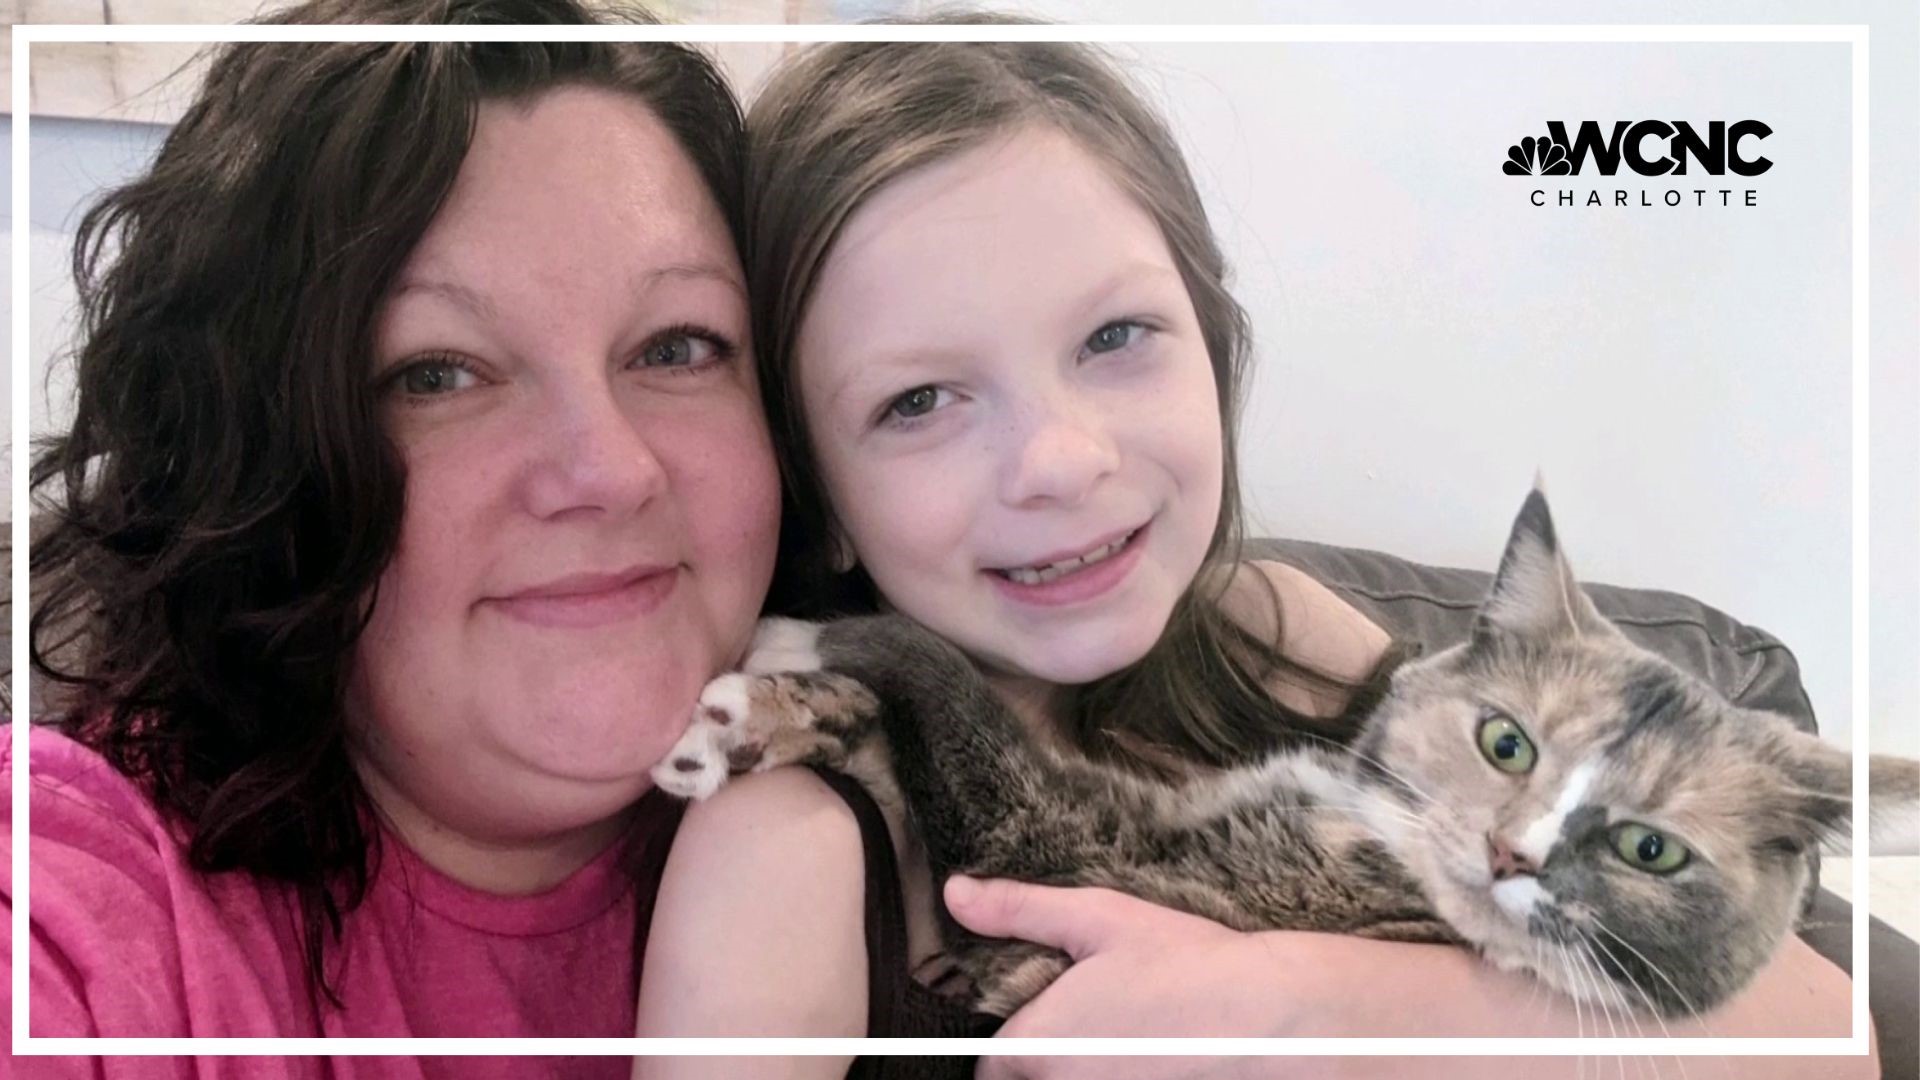 Brenna Edwards has learned a lot about life by rescuing cats. But she can't save them all, so she's raising money to help more felines find their forever homes.